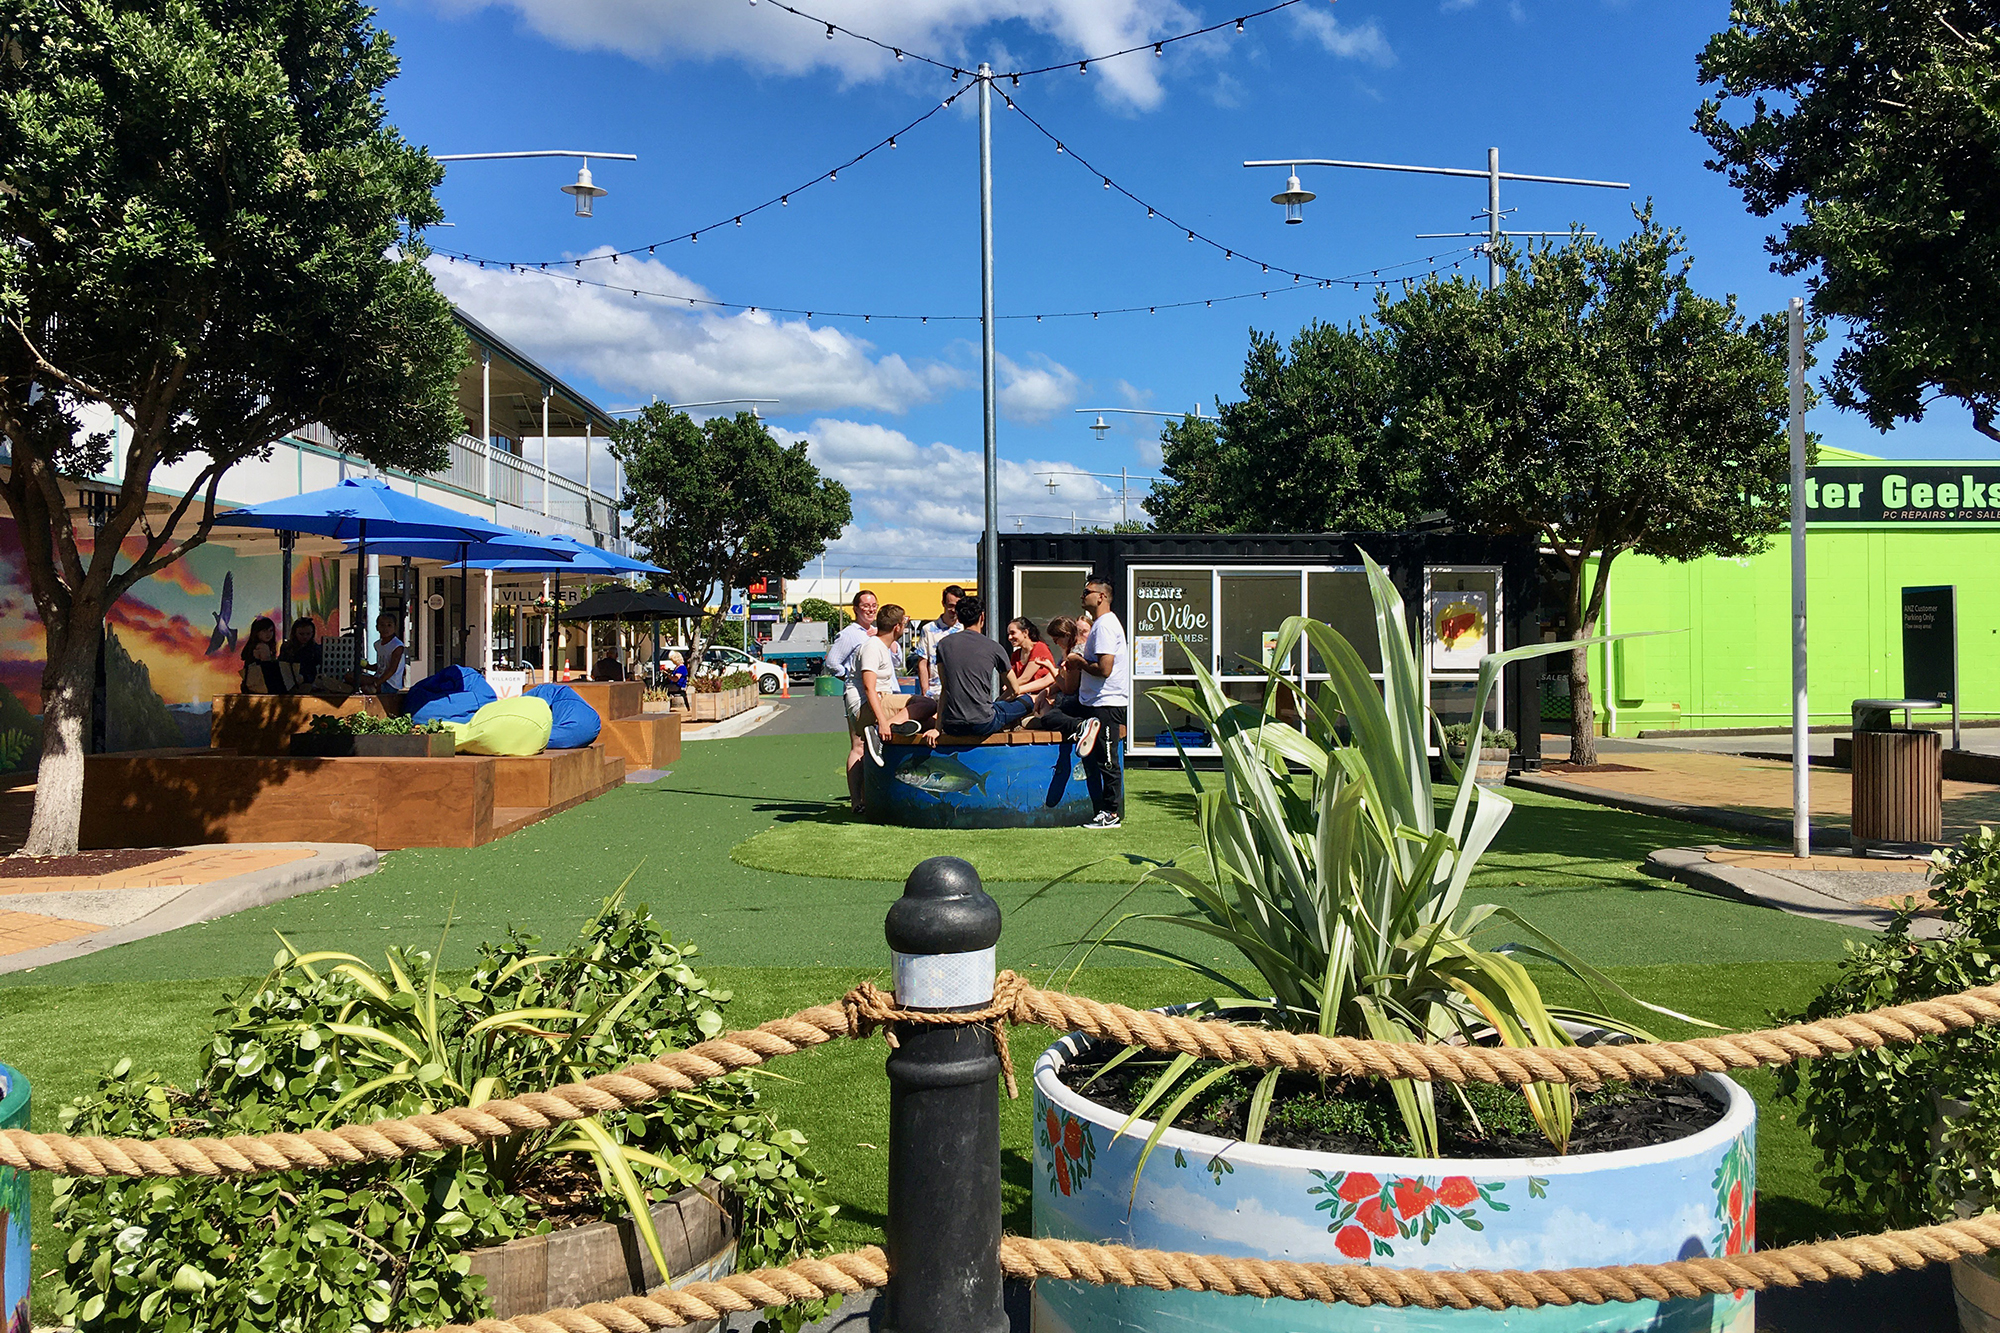 Artificial turf with bean bags, festive string lights and people gathered in the middle.